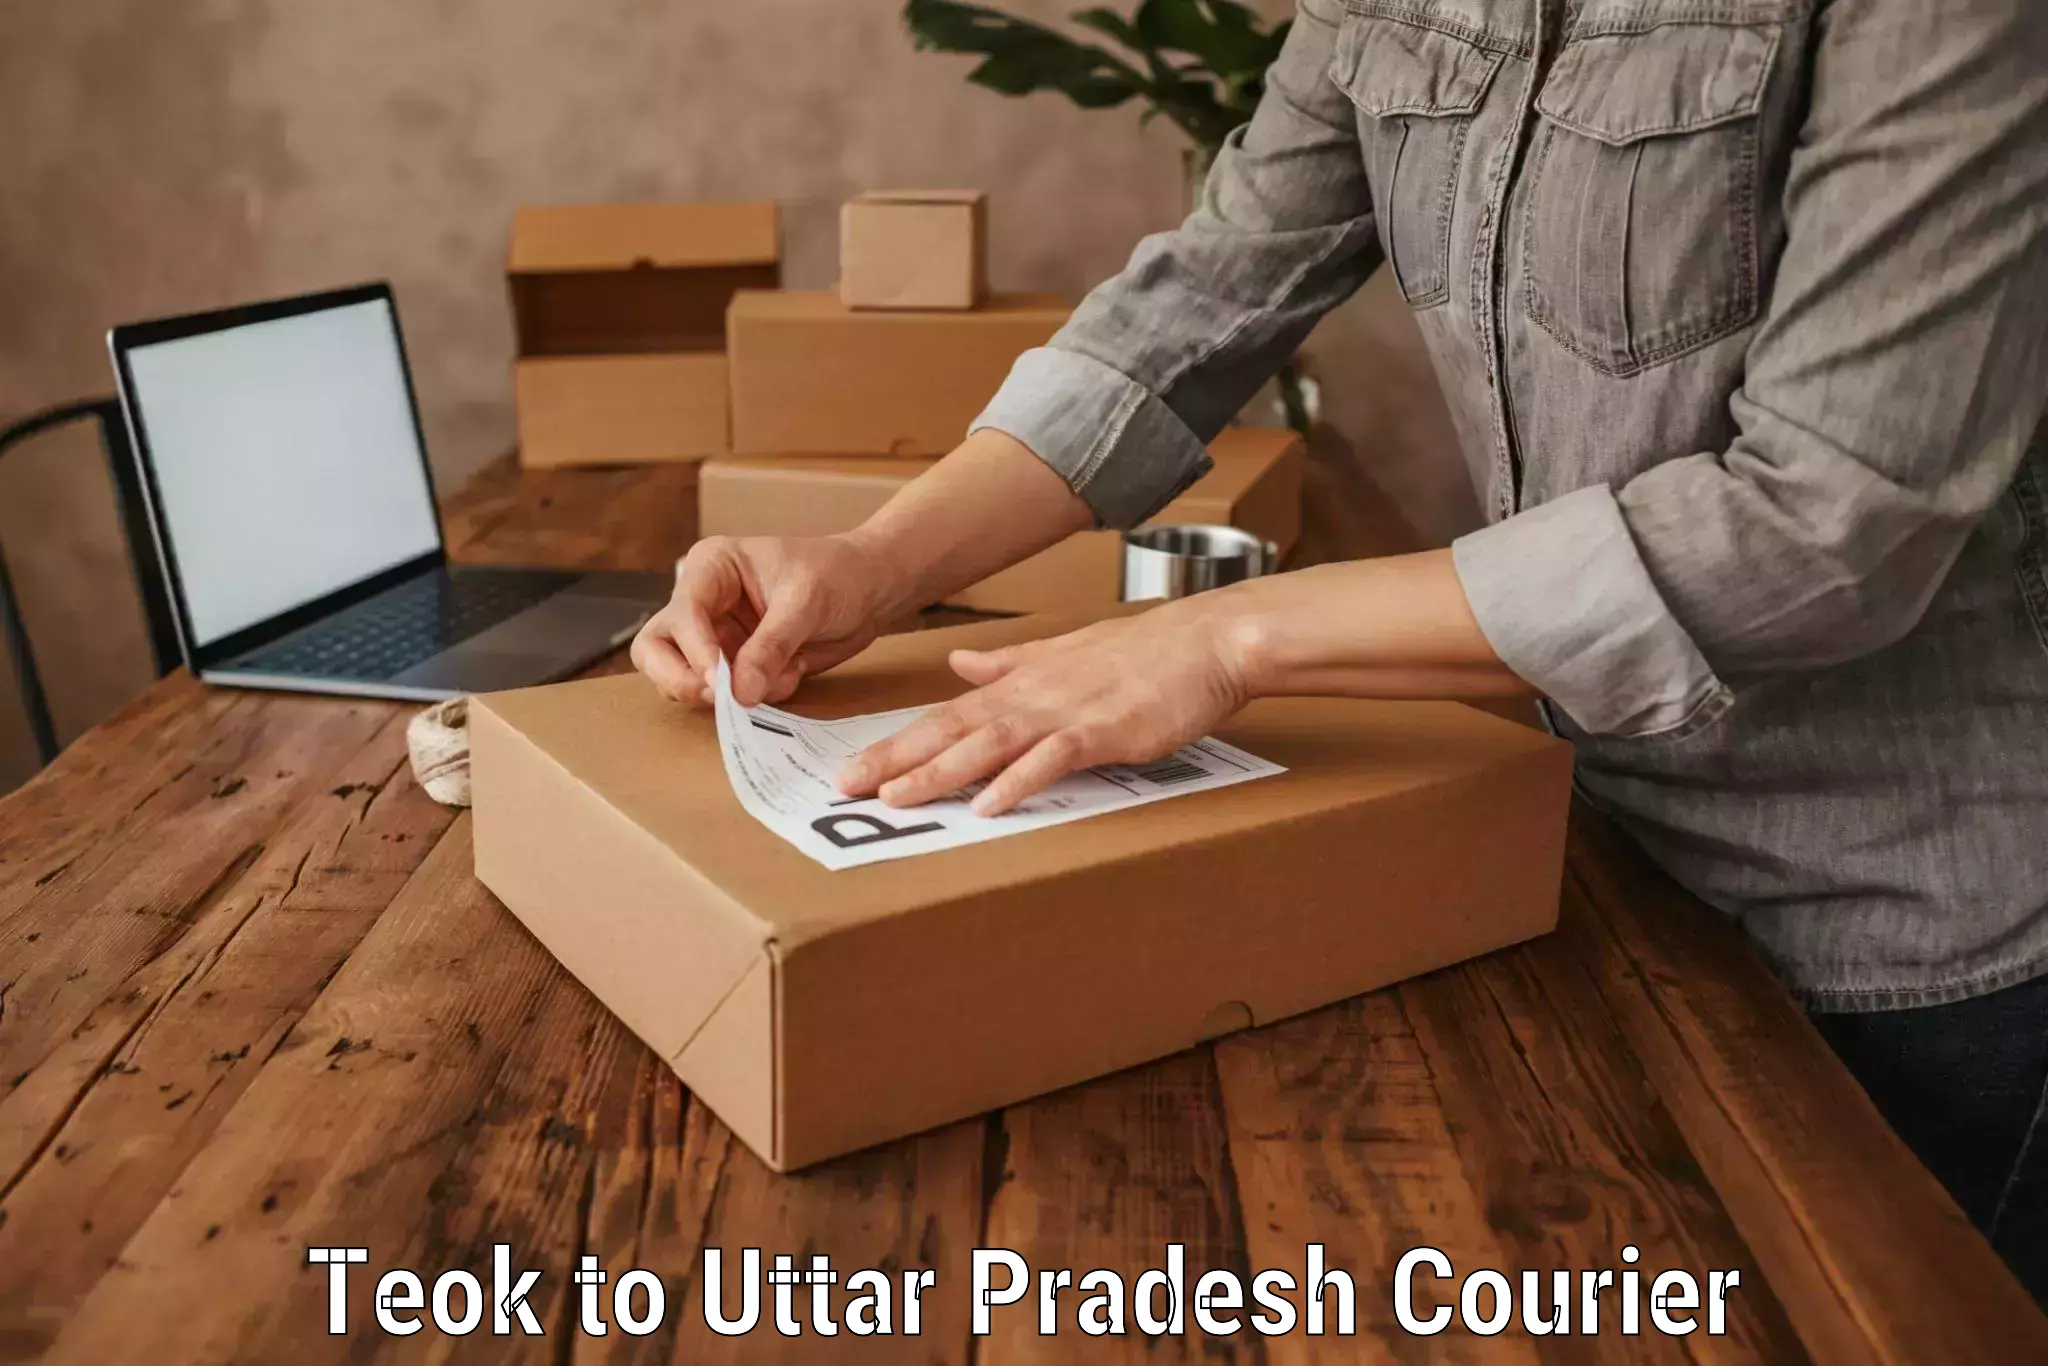 Hassle-free luggage shipping Teok to Lucknow